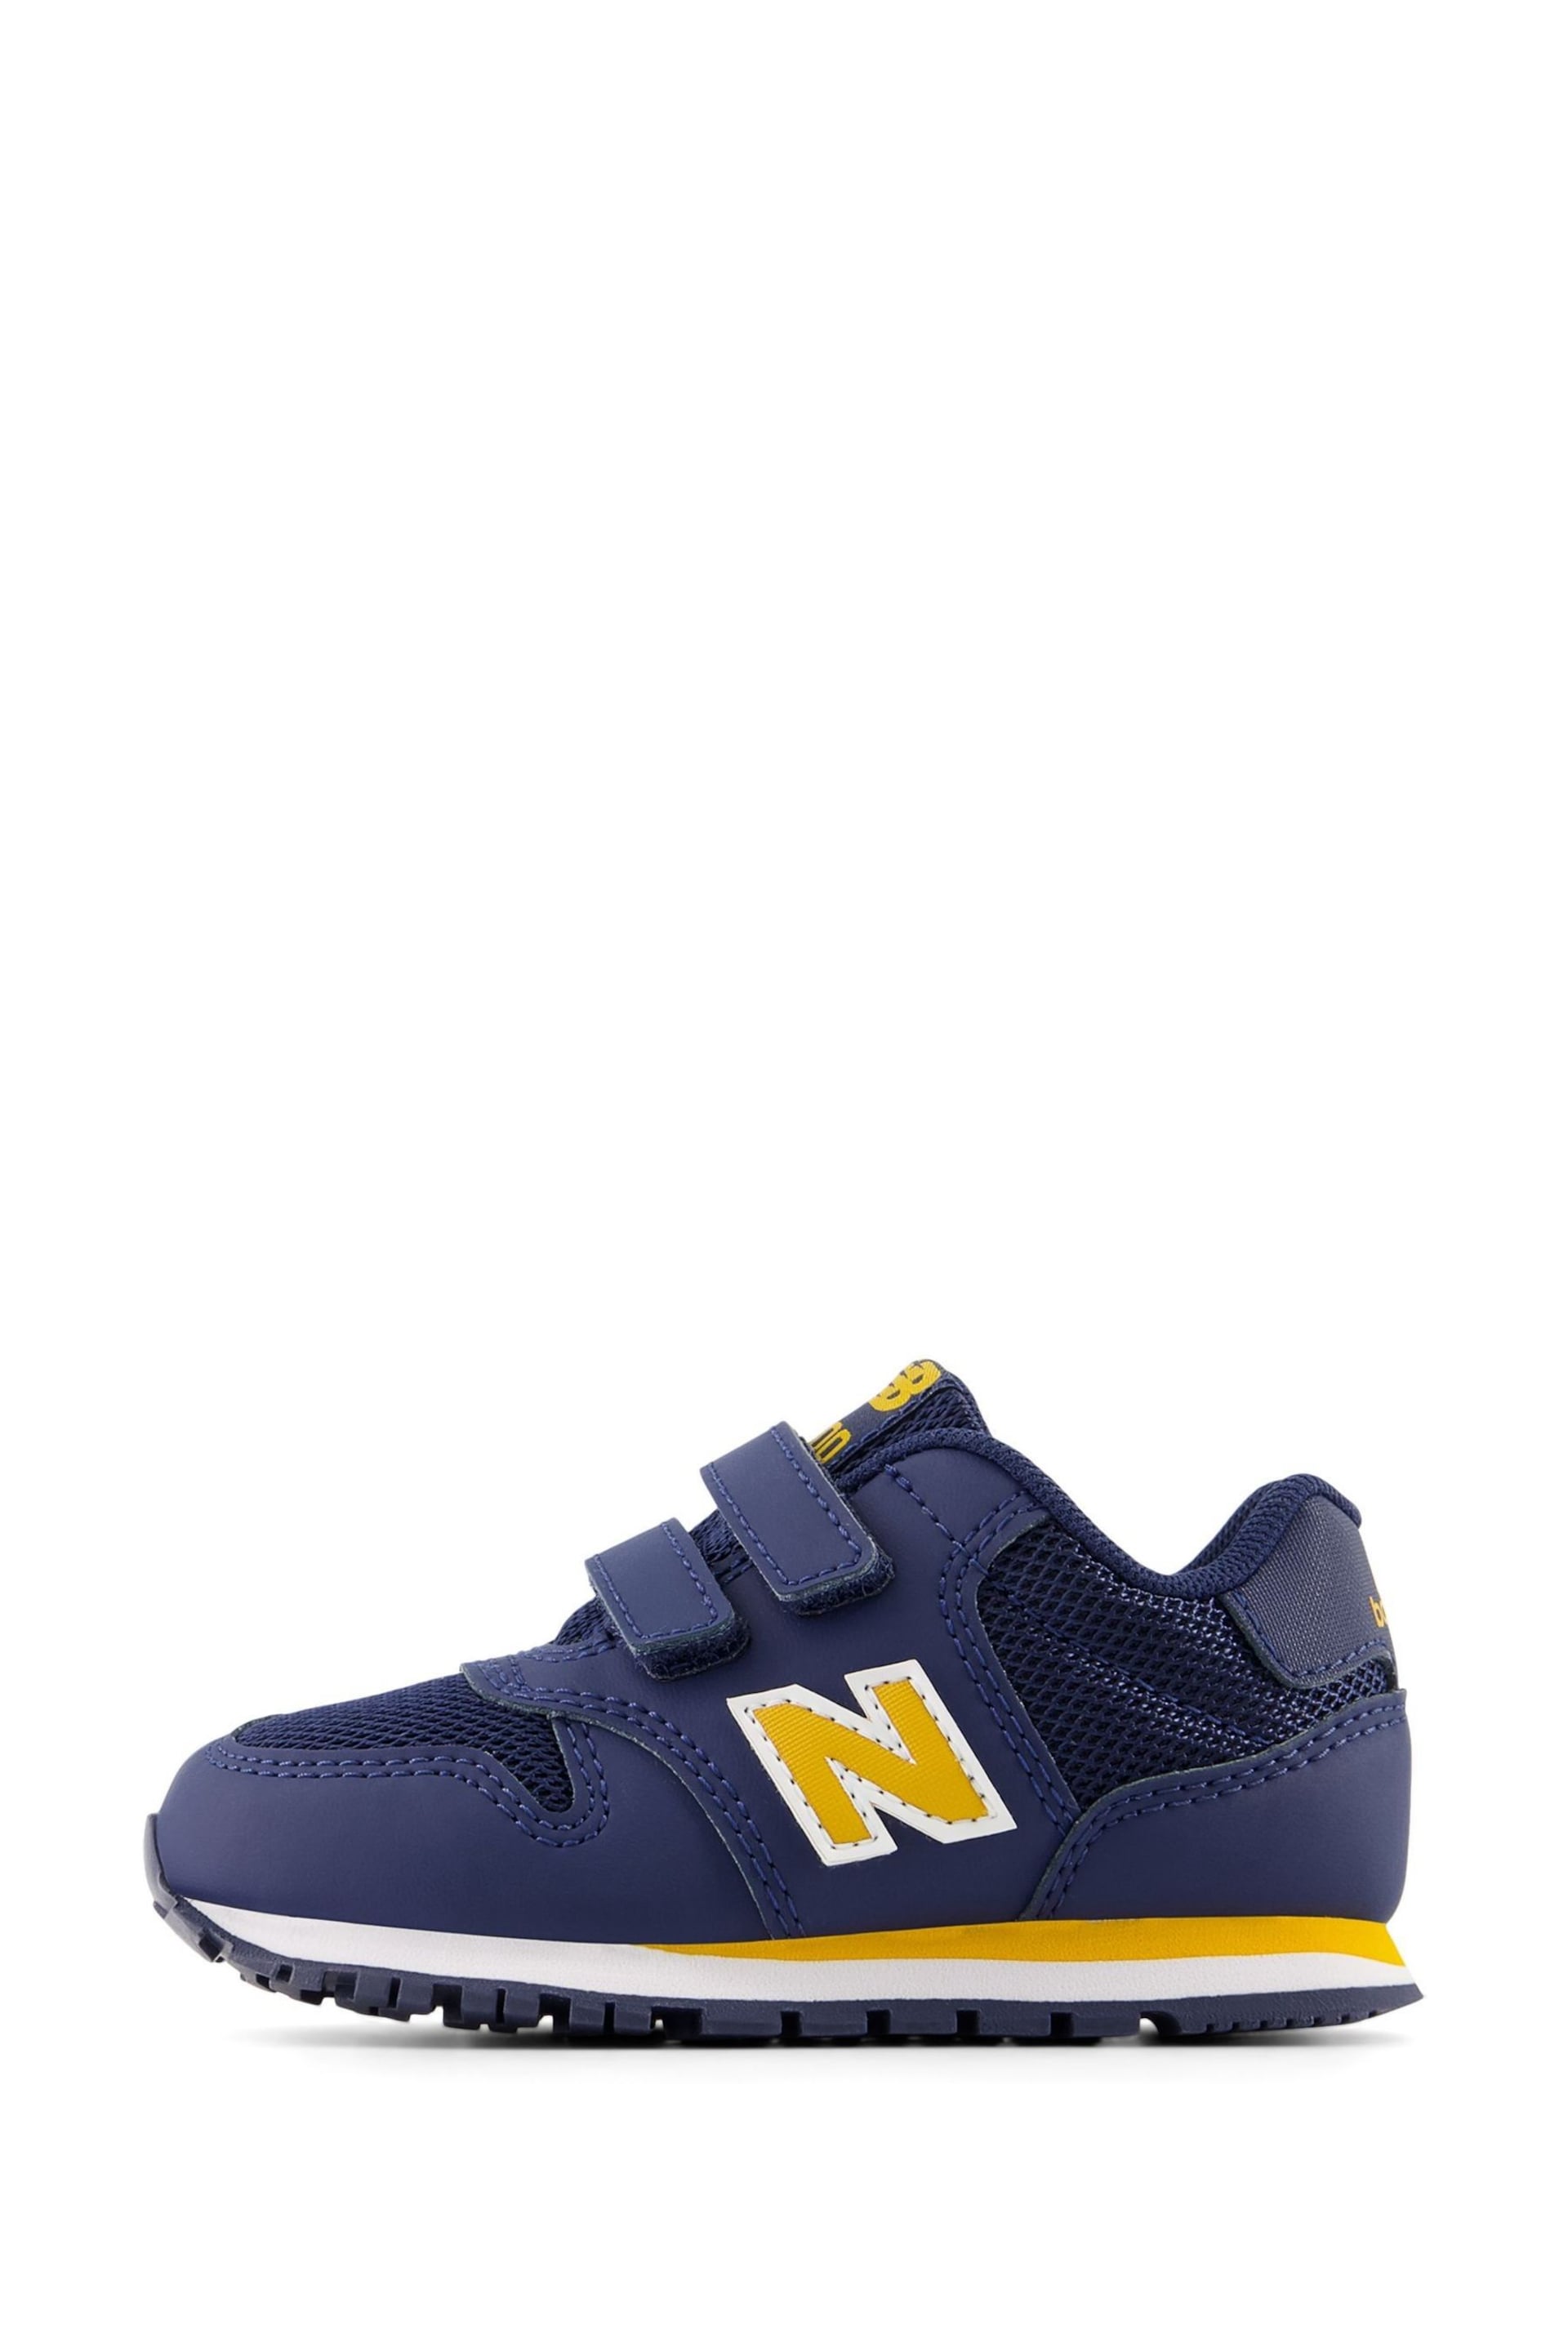 New Balance Blue Boys 500 Trainers - Image 2 of 5